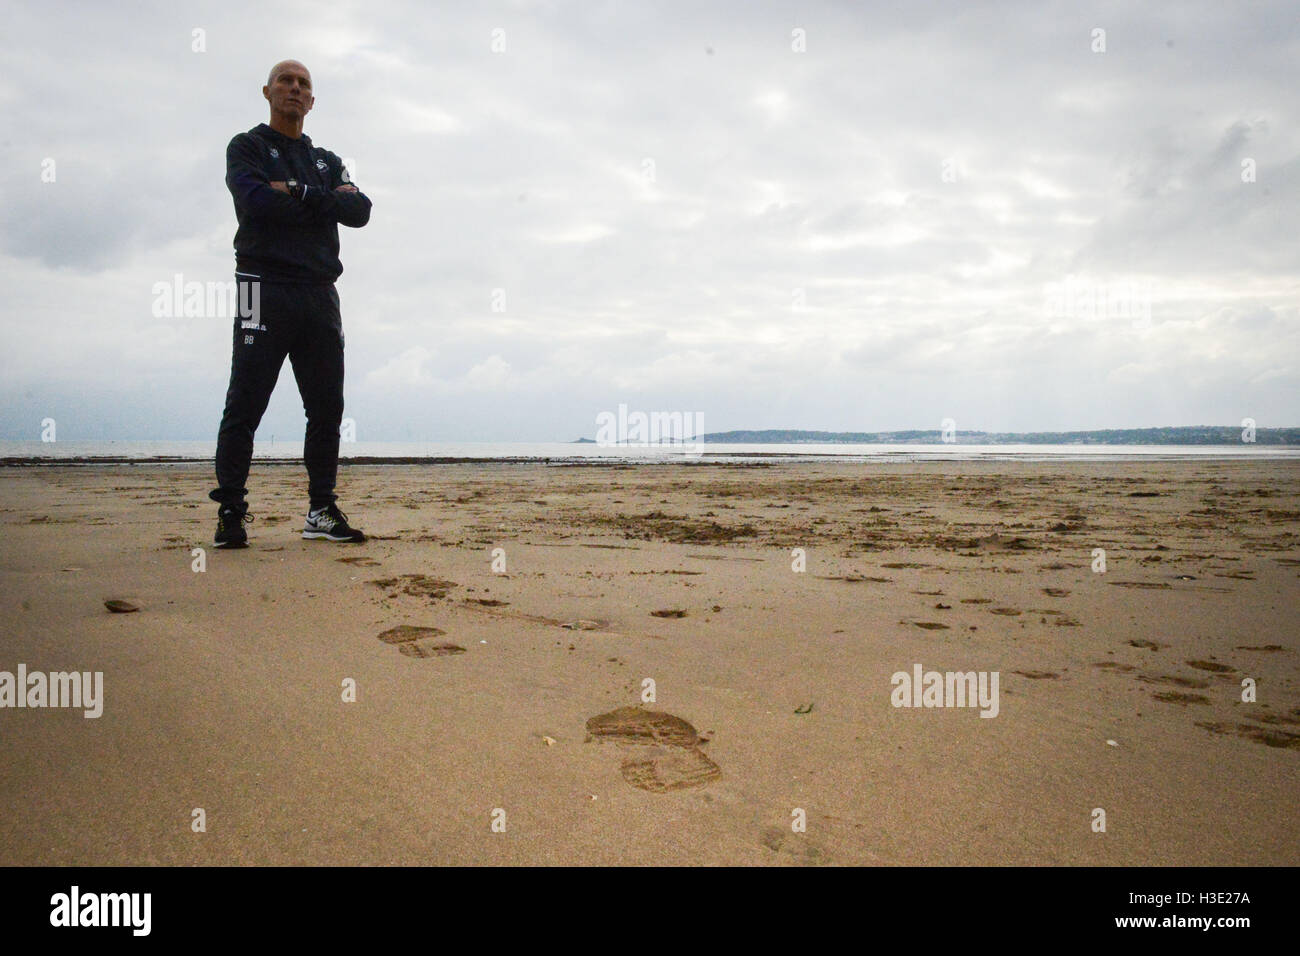 Swansea, Wales, UK. 7th October 2016. Swansea City new manager, Bob Bradley pictured posing for photographers on Swansea Bay after the official press conference at the Marriott Hotel Swansea. Credit:  Robert Melen/Alamy Live News Stock Photo